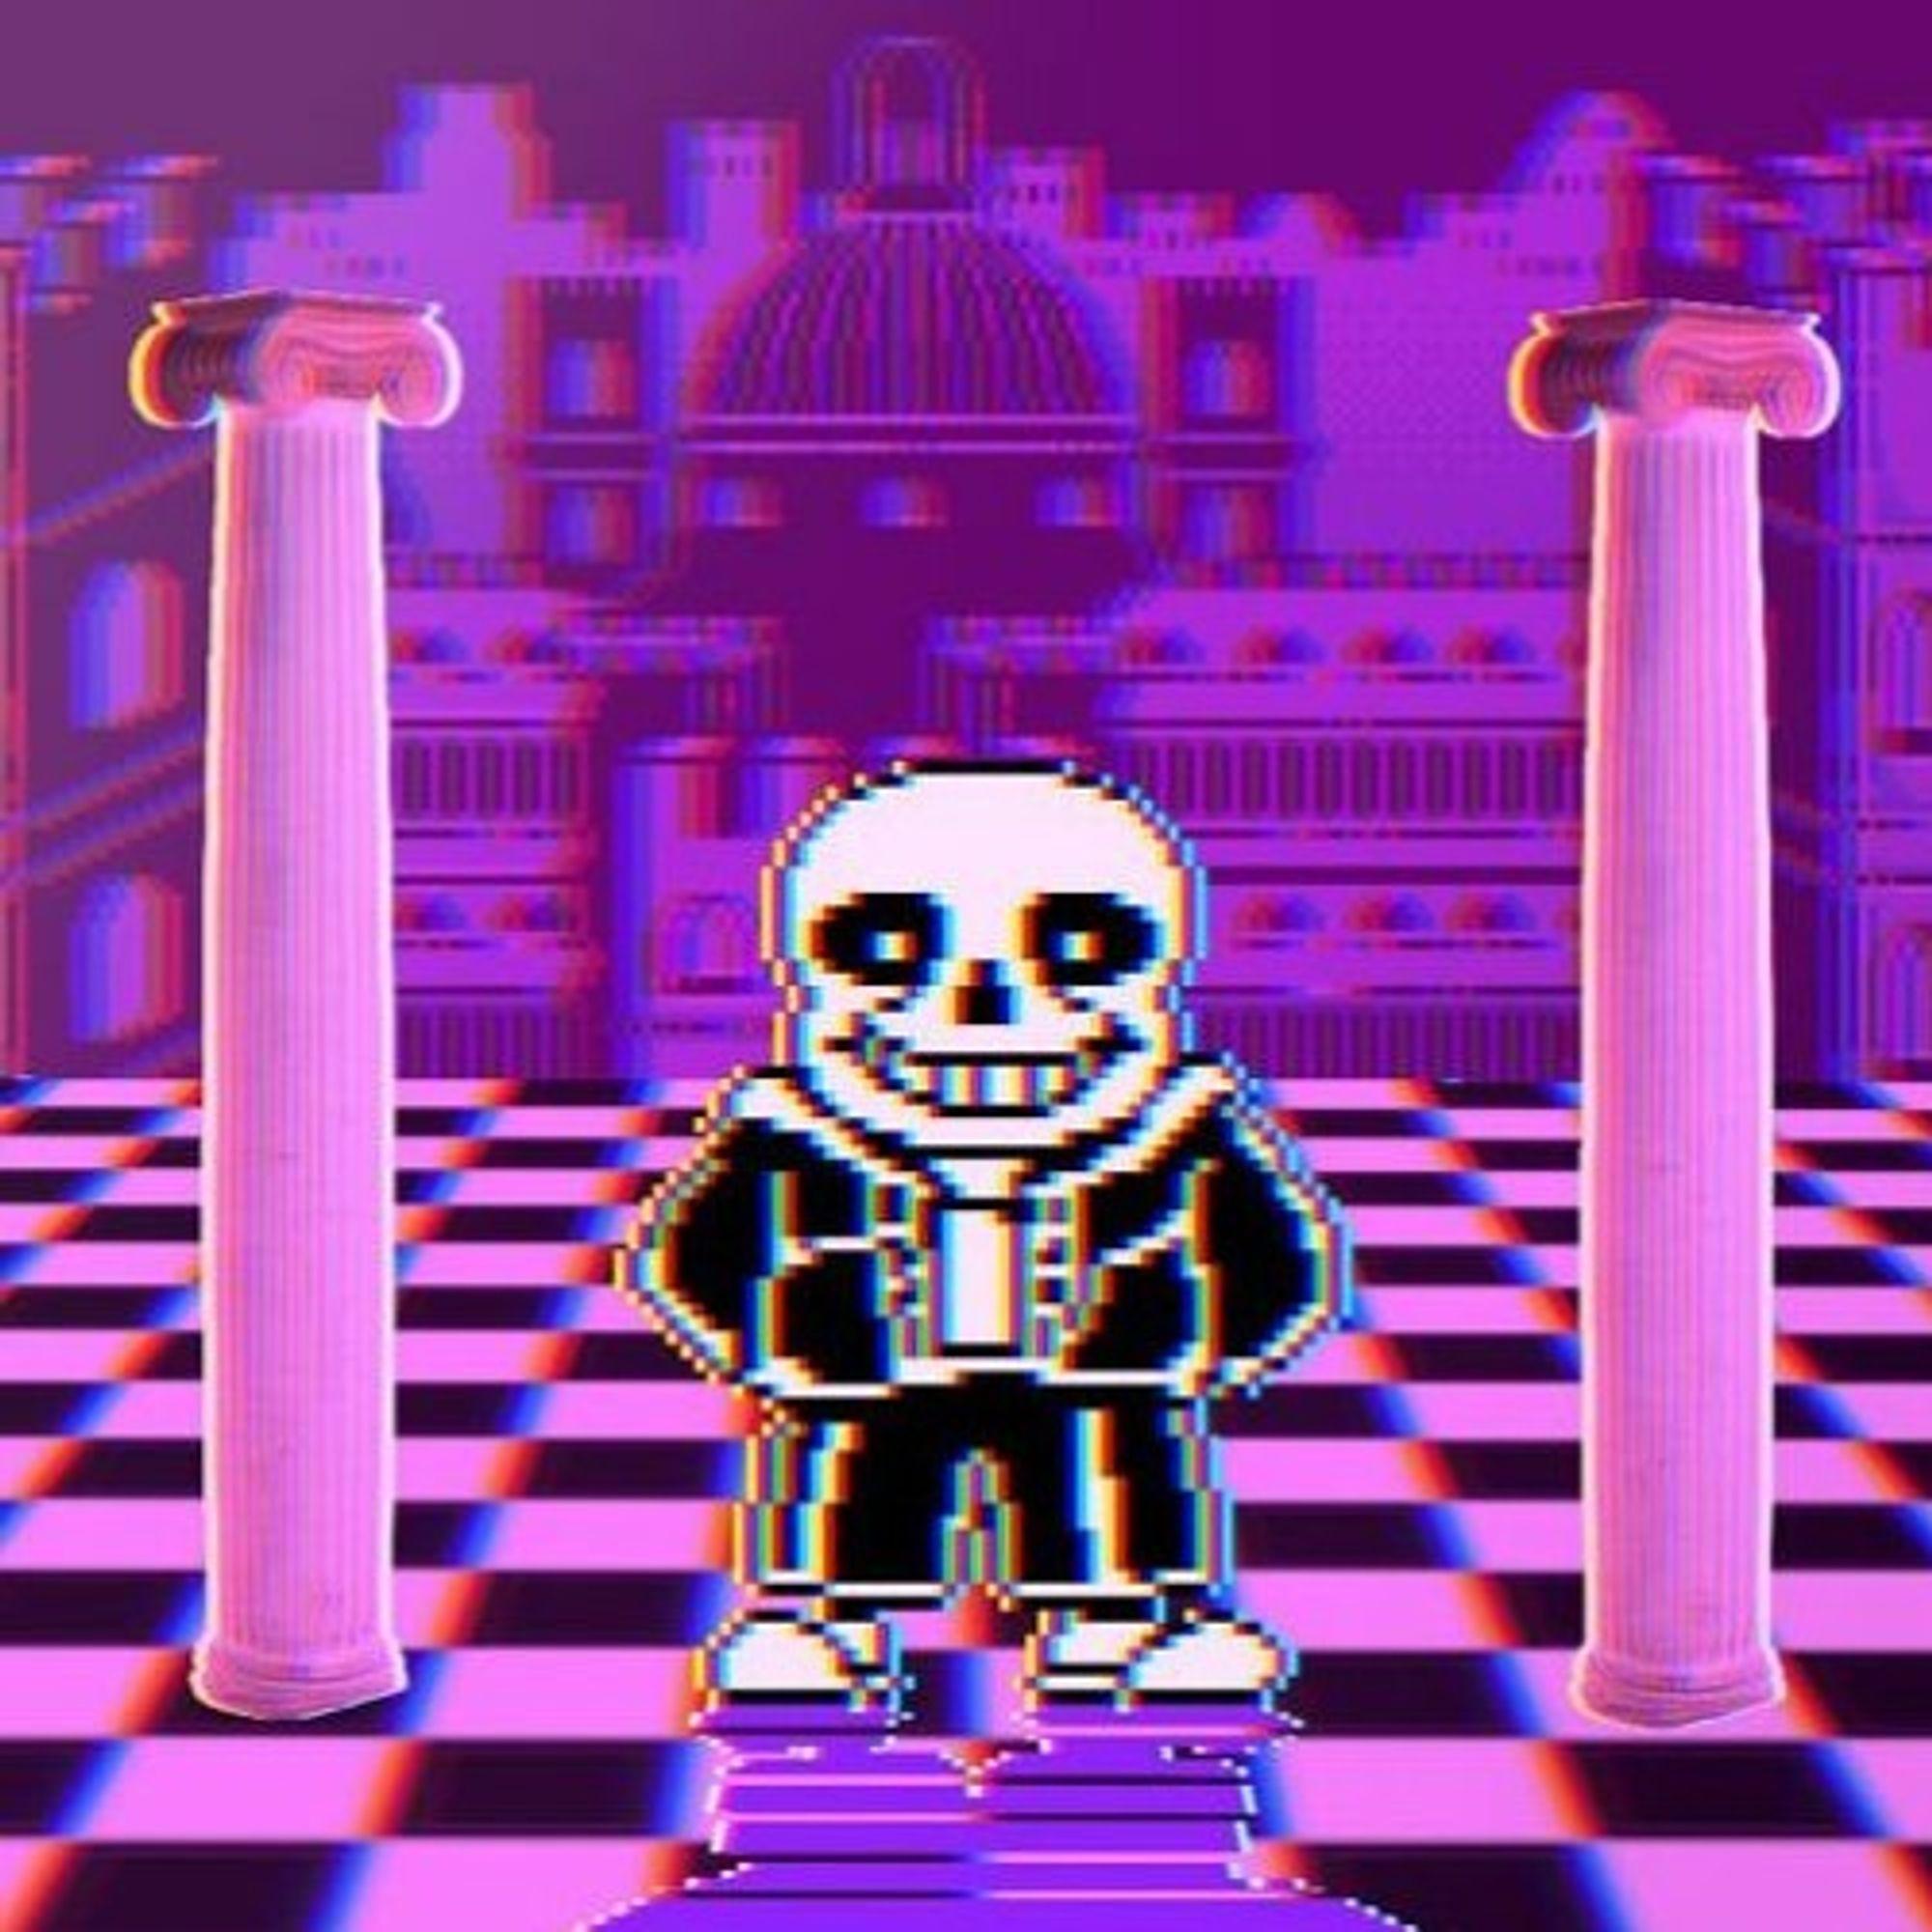 Megalovania, but with vaporwave.